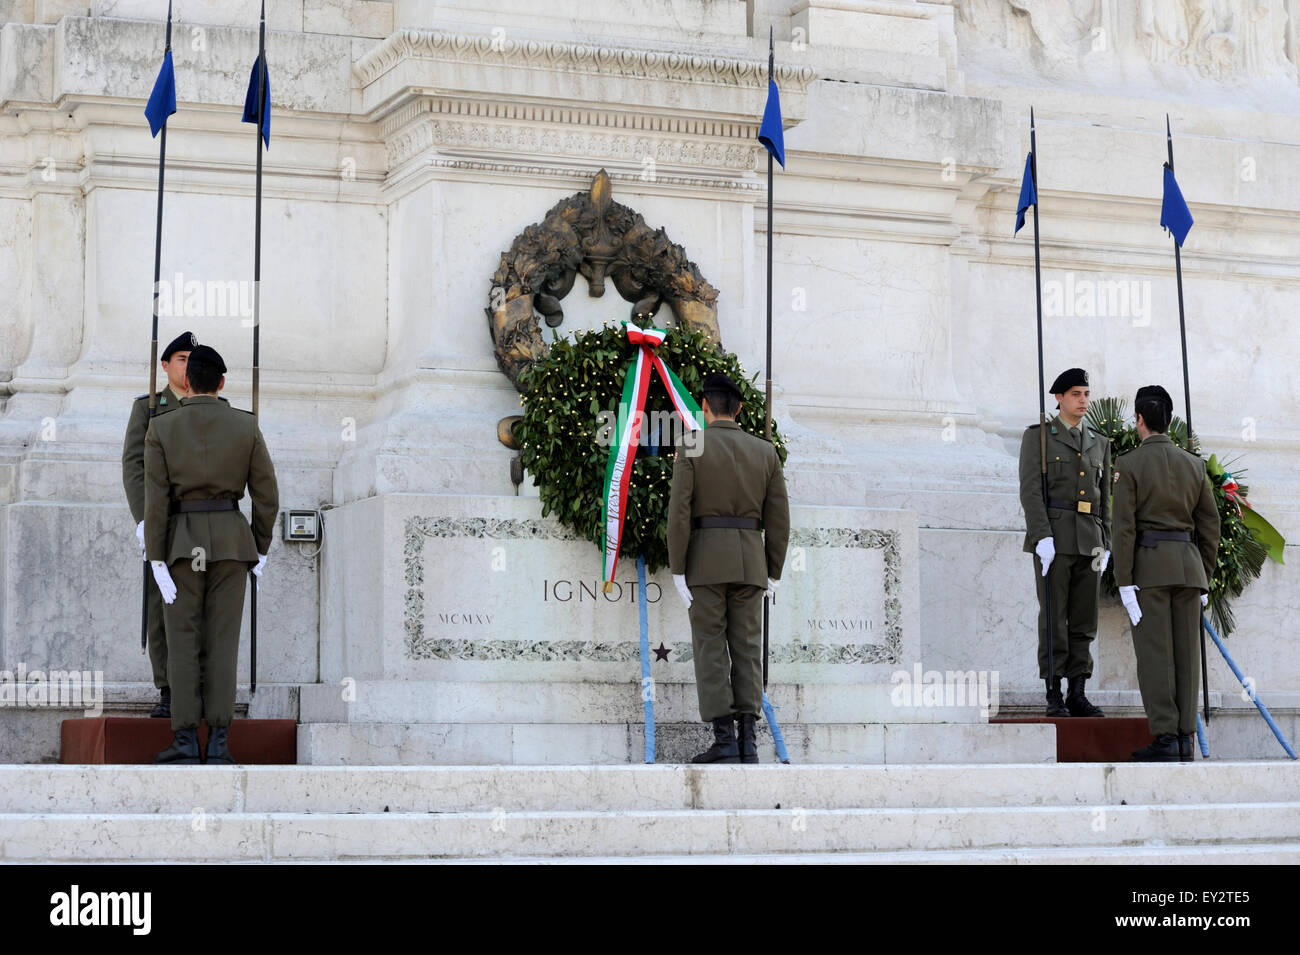 Italy, Rome, Piazza Venezia, Vittoriano, altar of the fatherland, monument to the unknown soldier, changing of the guard Stock Photo